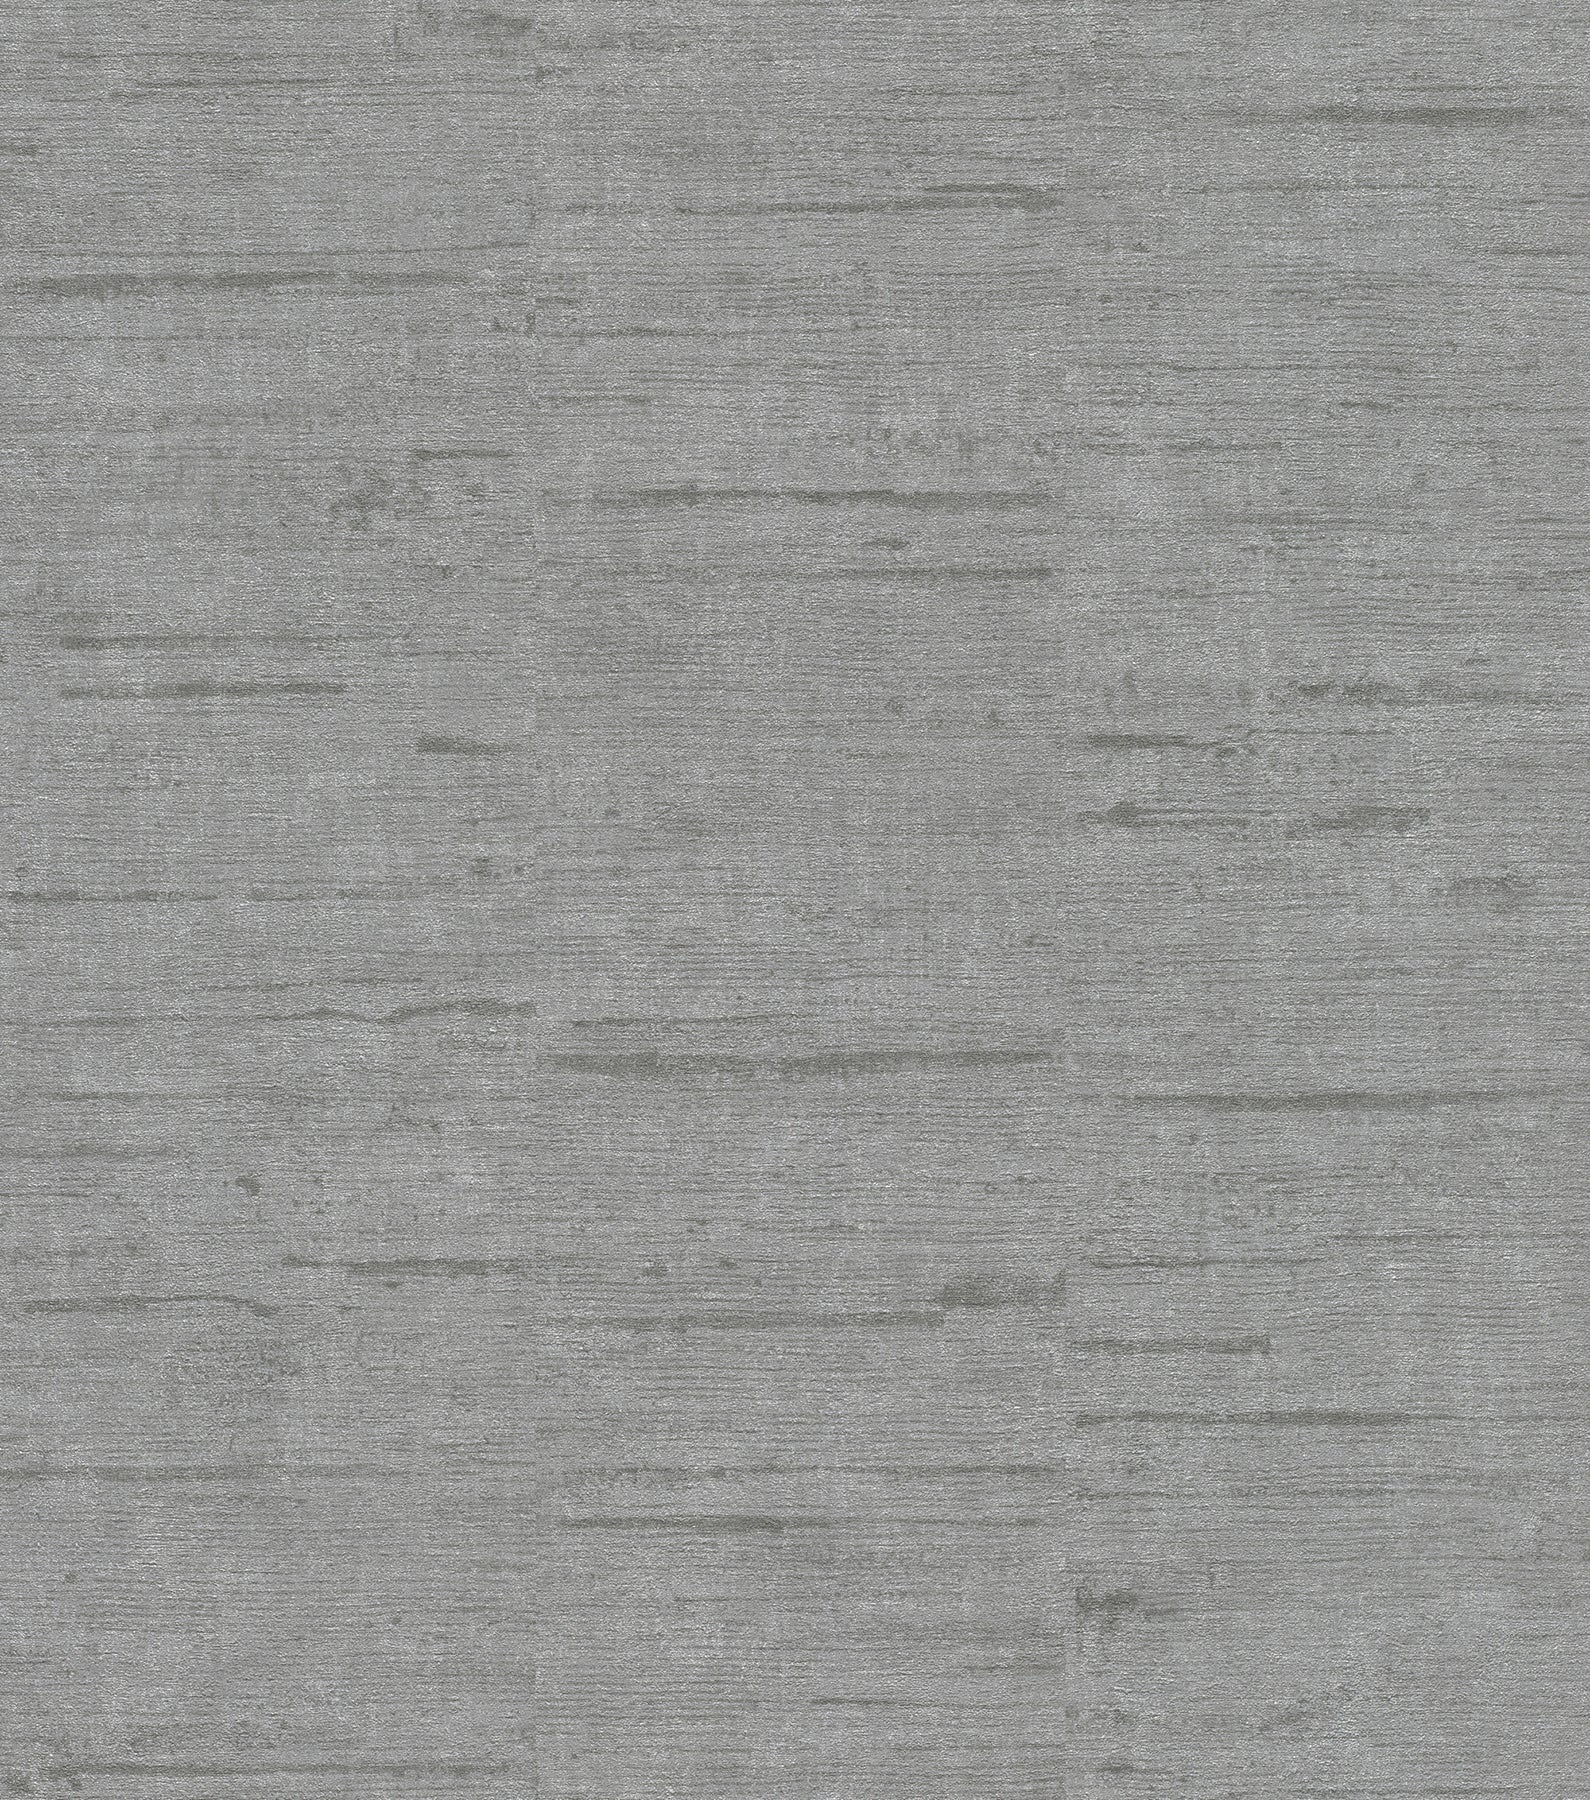 Looking 4015-426731 Beyond Textures Maclure Silver Striated Texture Silver by Advantage